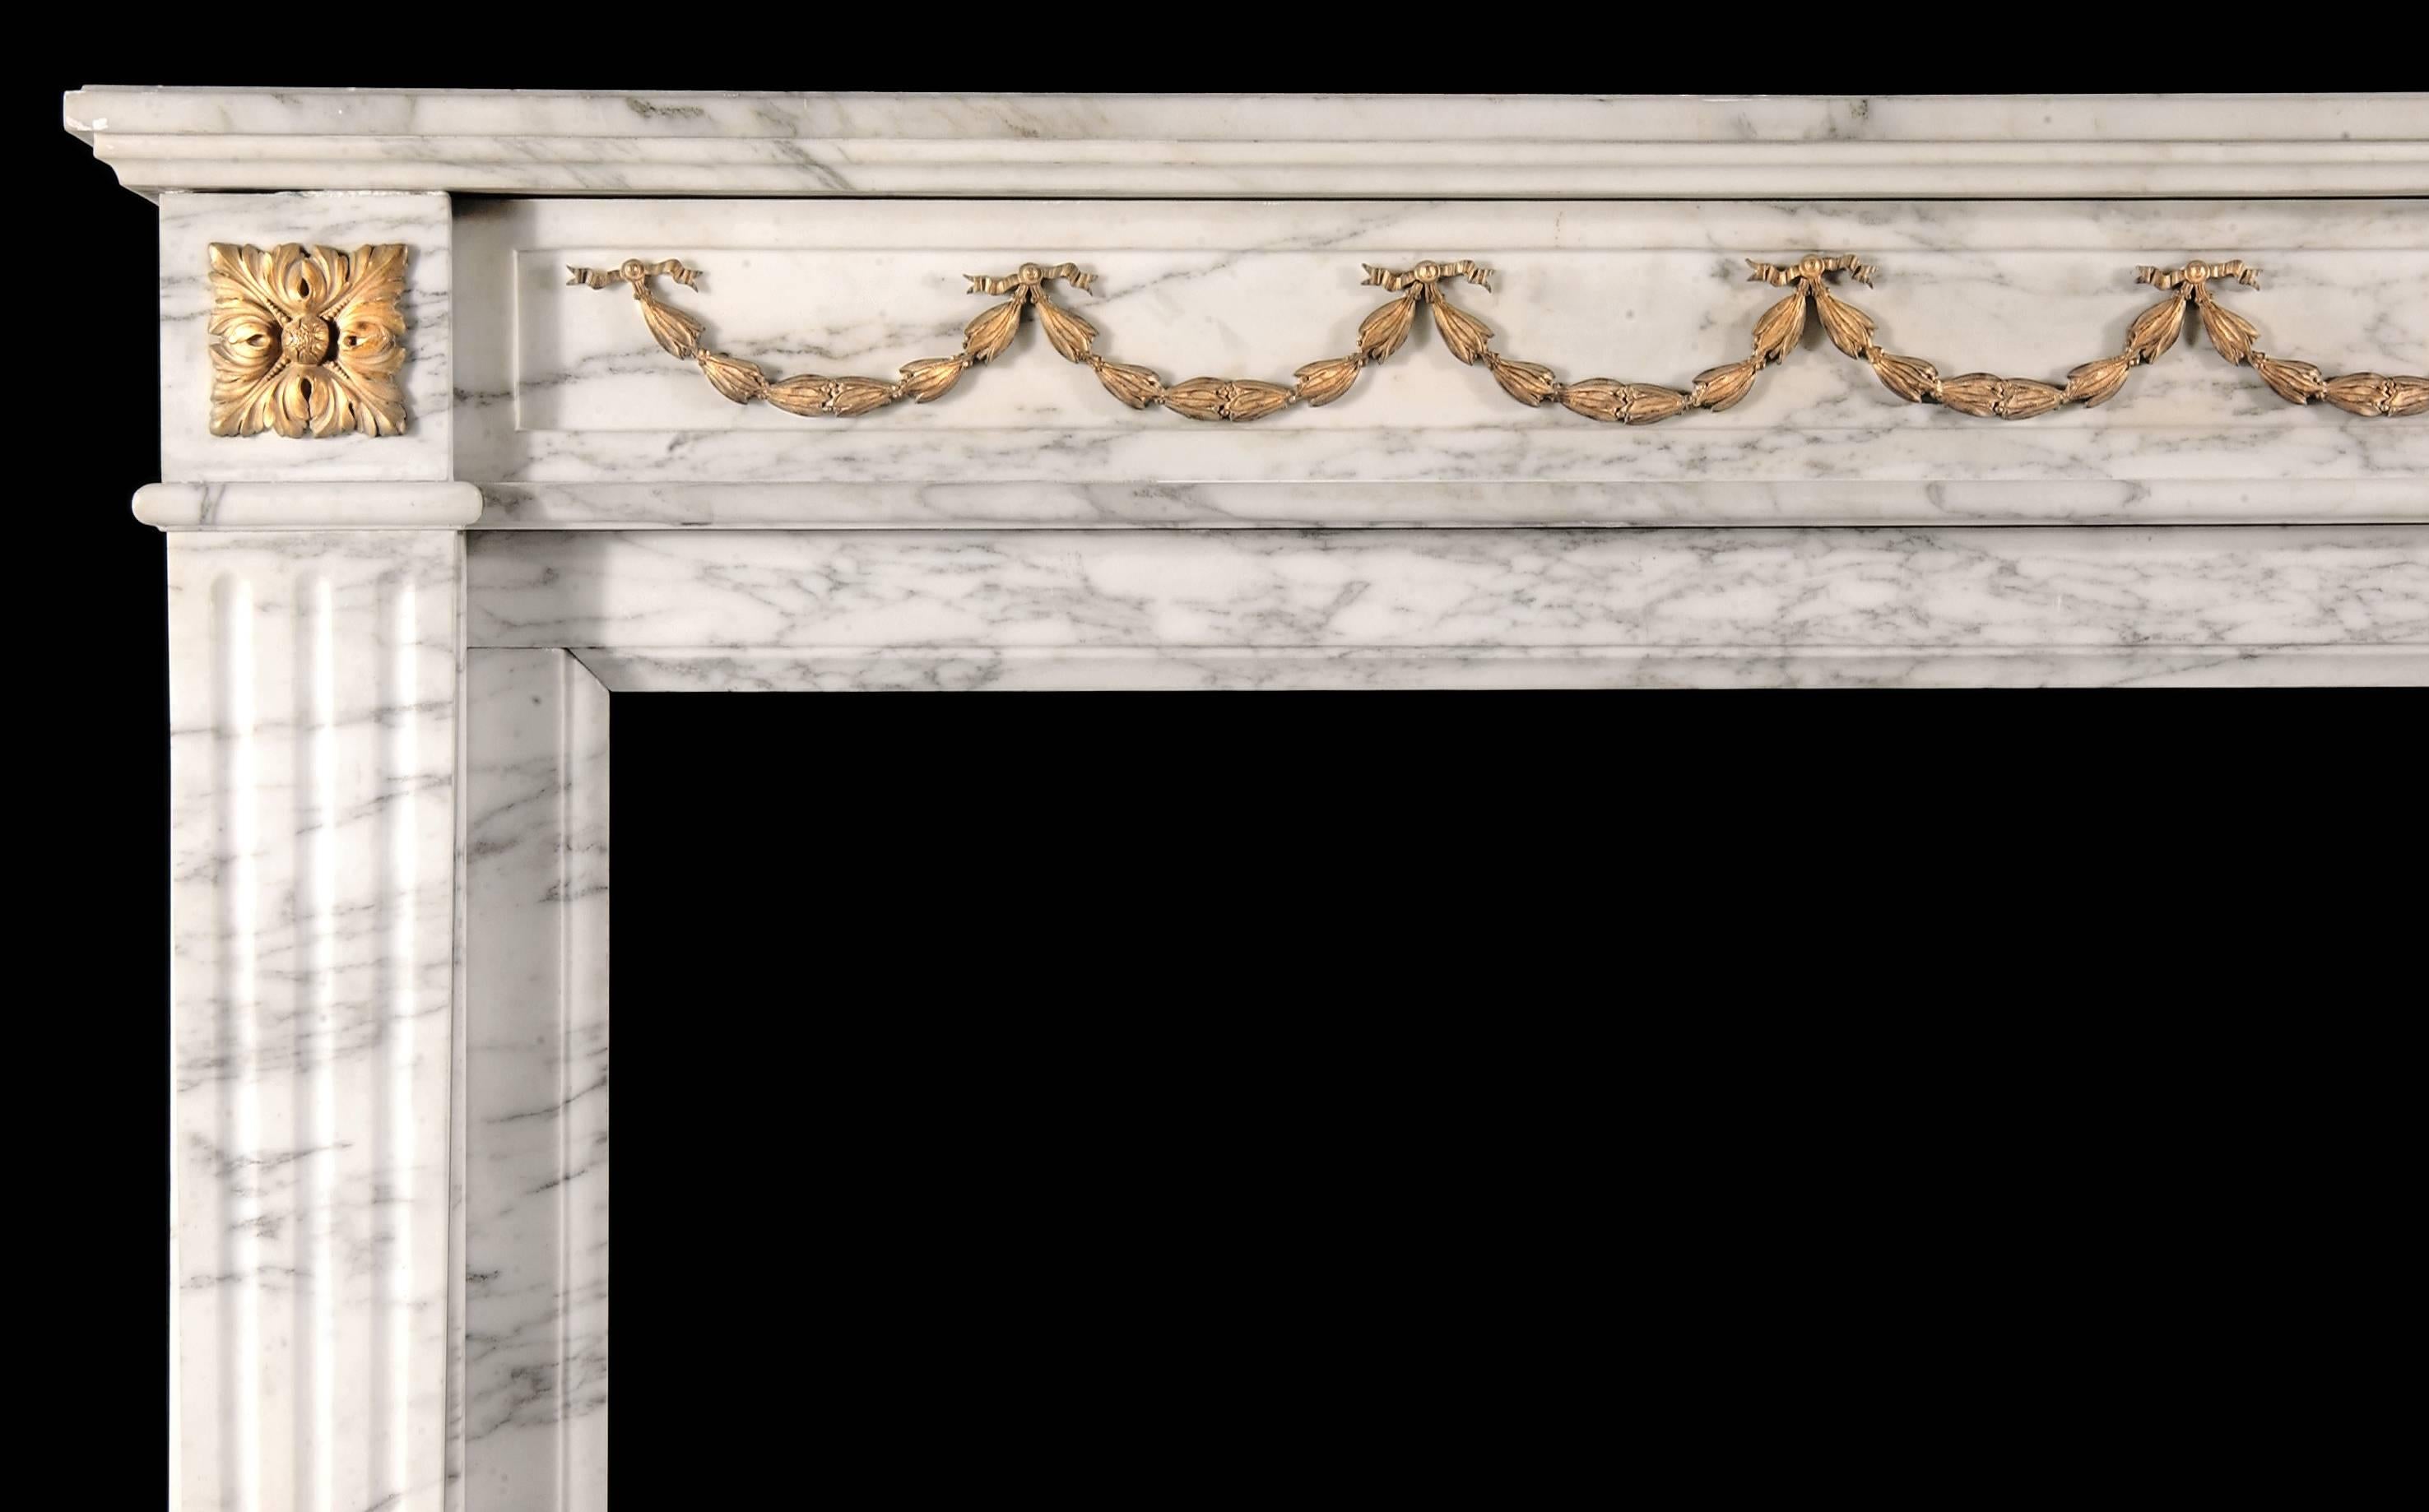 Regency 19th Century French Statuary Marble and Gilt Ormolu Antique Fireplace Mantel